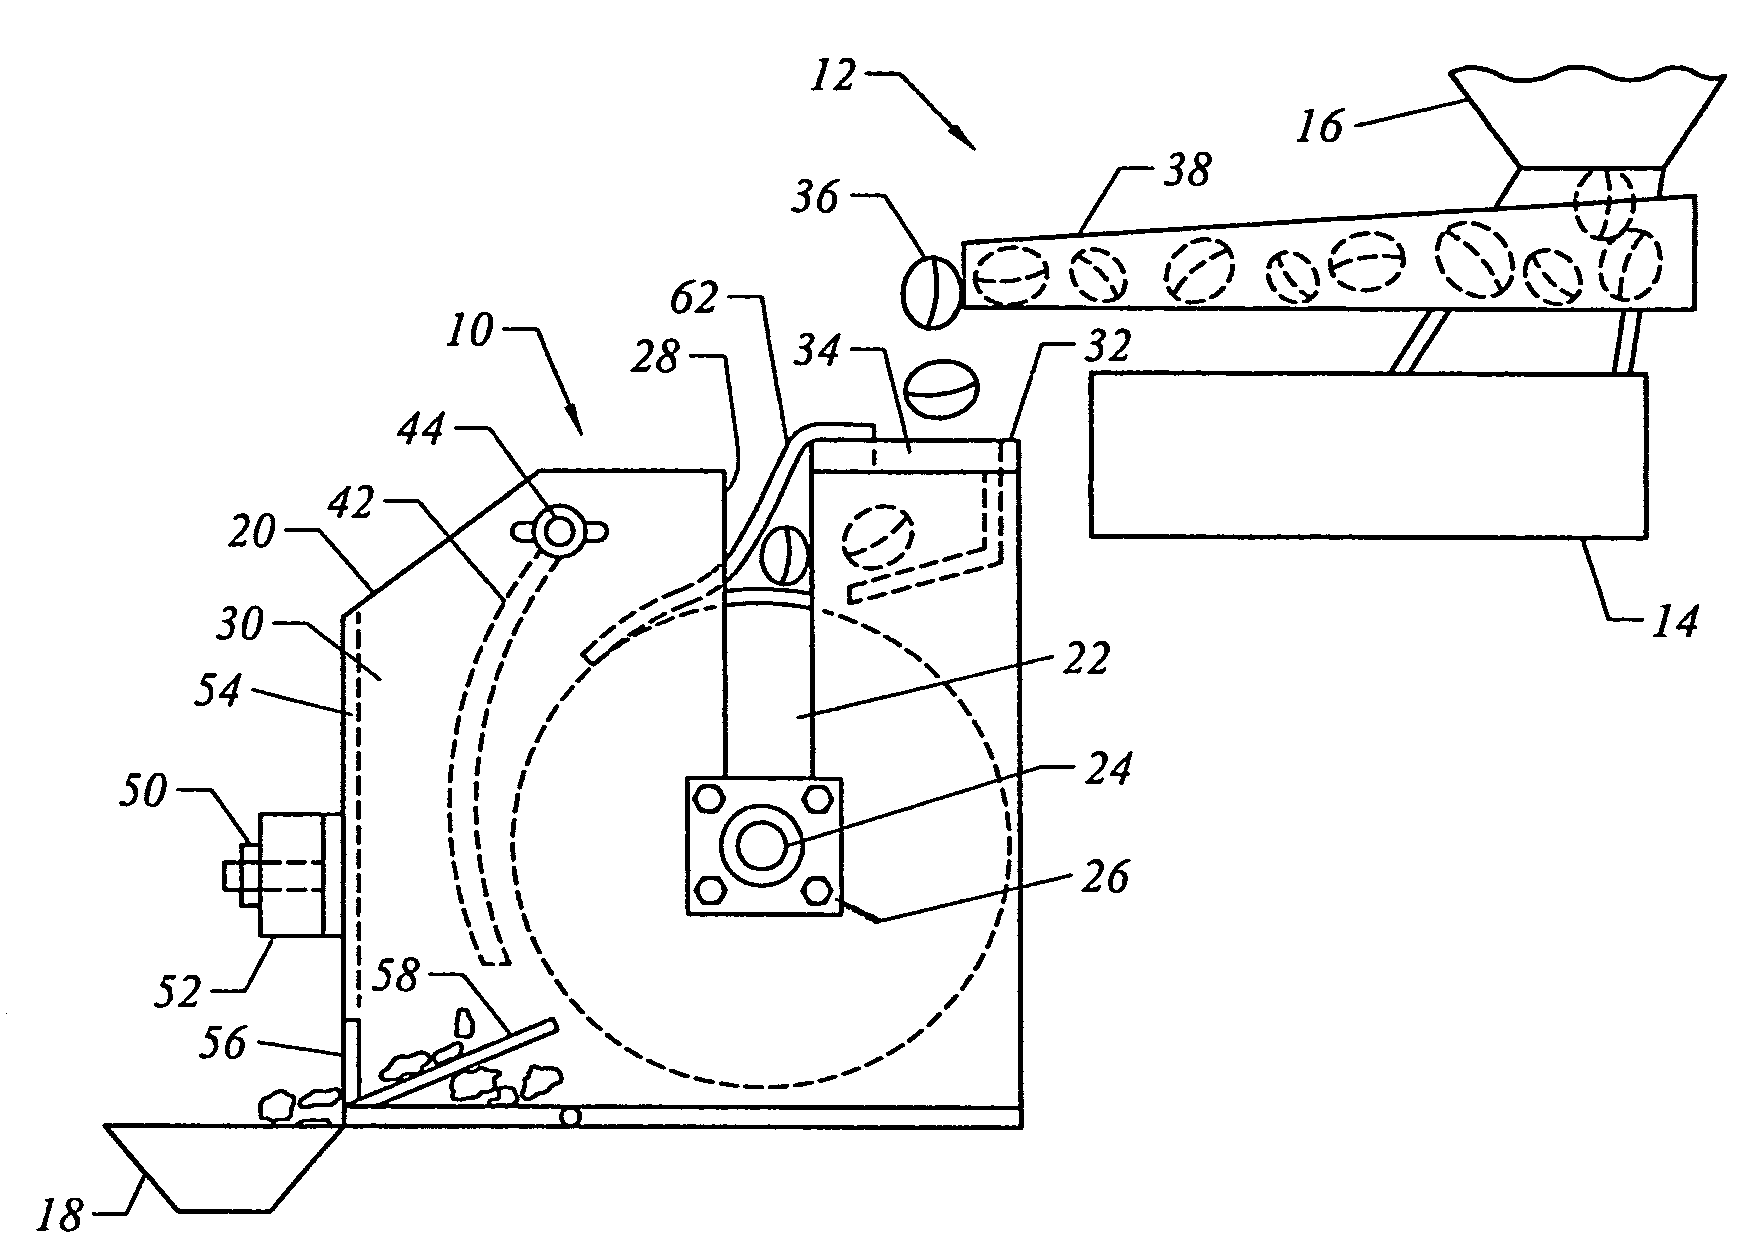 Nut cracking mechanism for variable-sized nuts